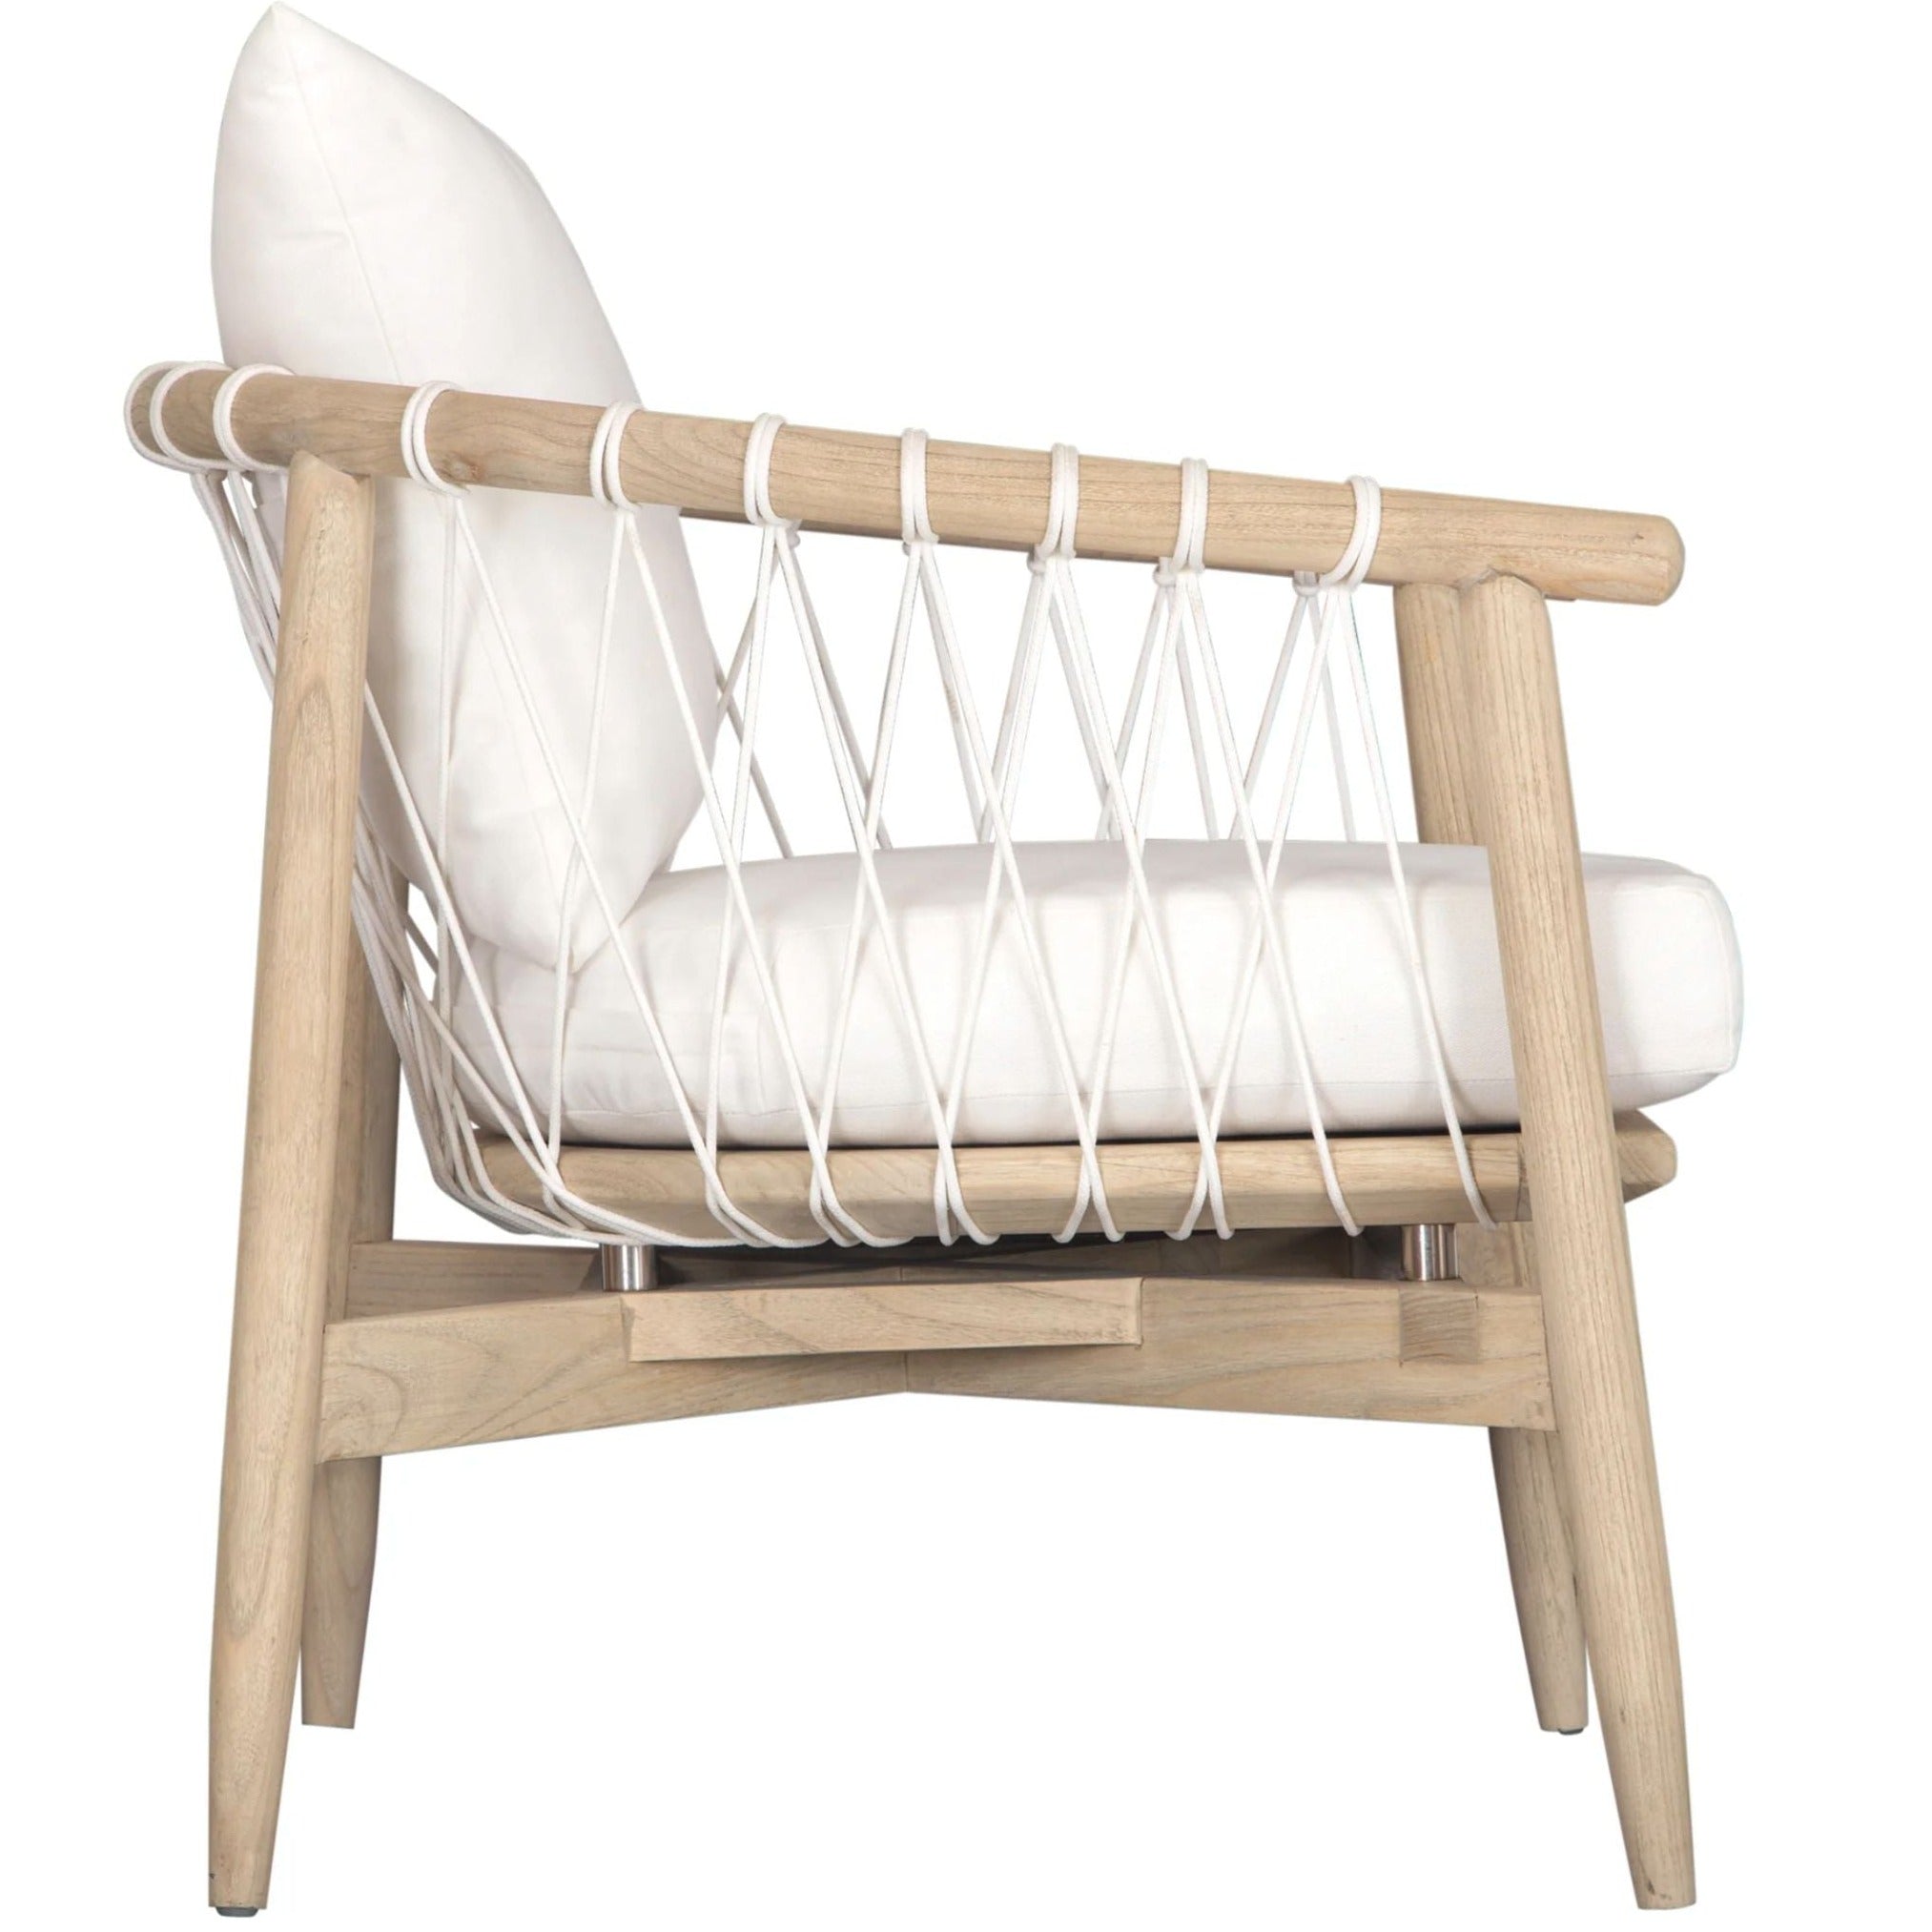 Uniqwa Arniston Occasional Chair - Natural